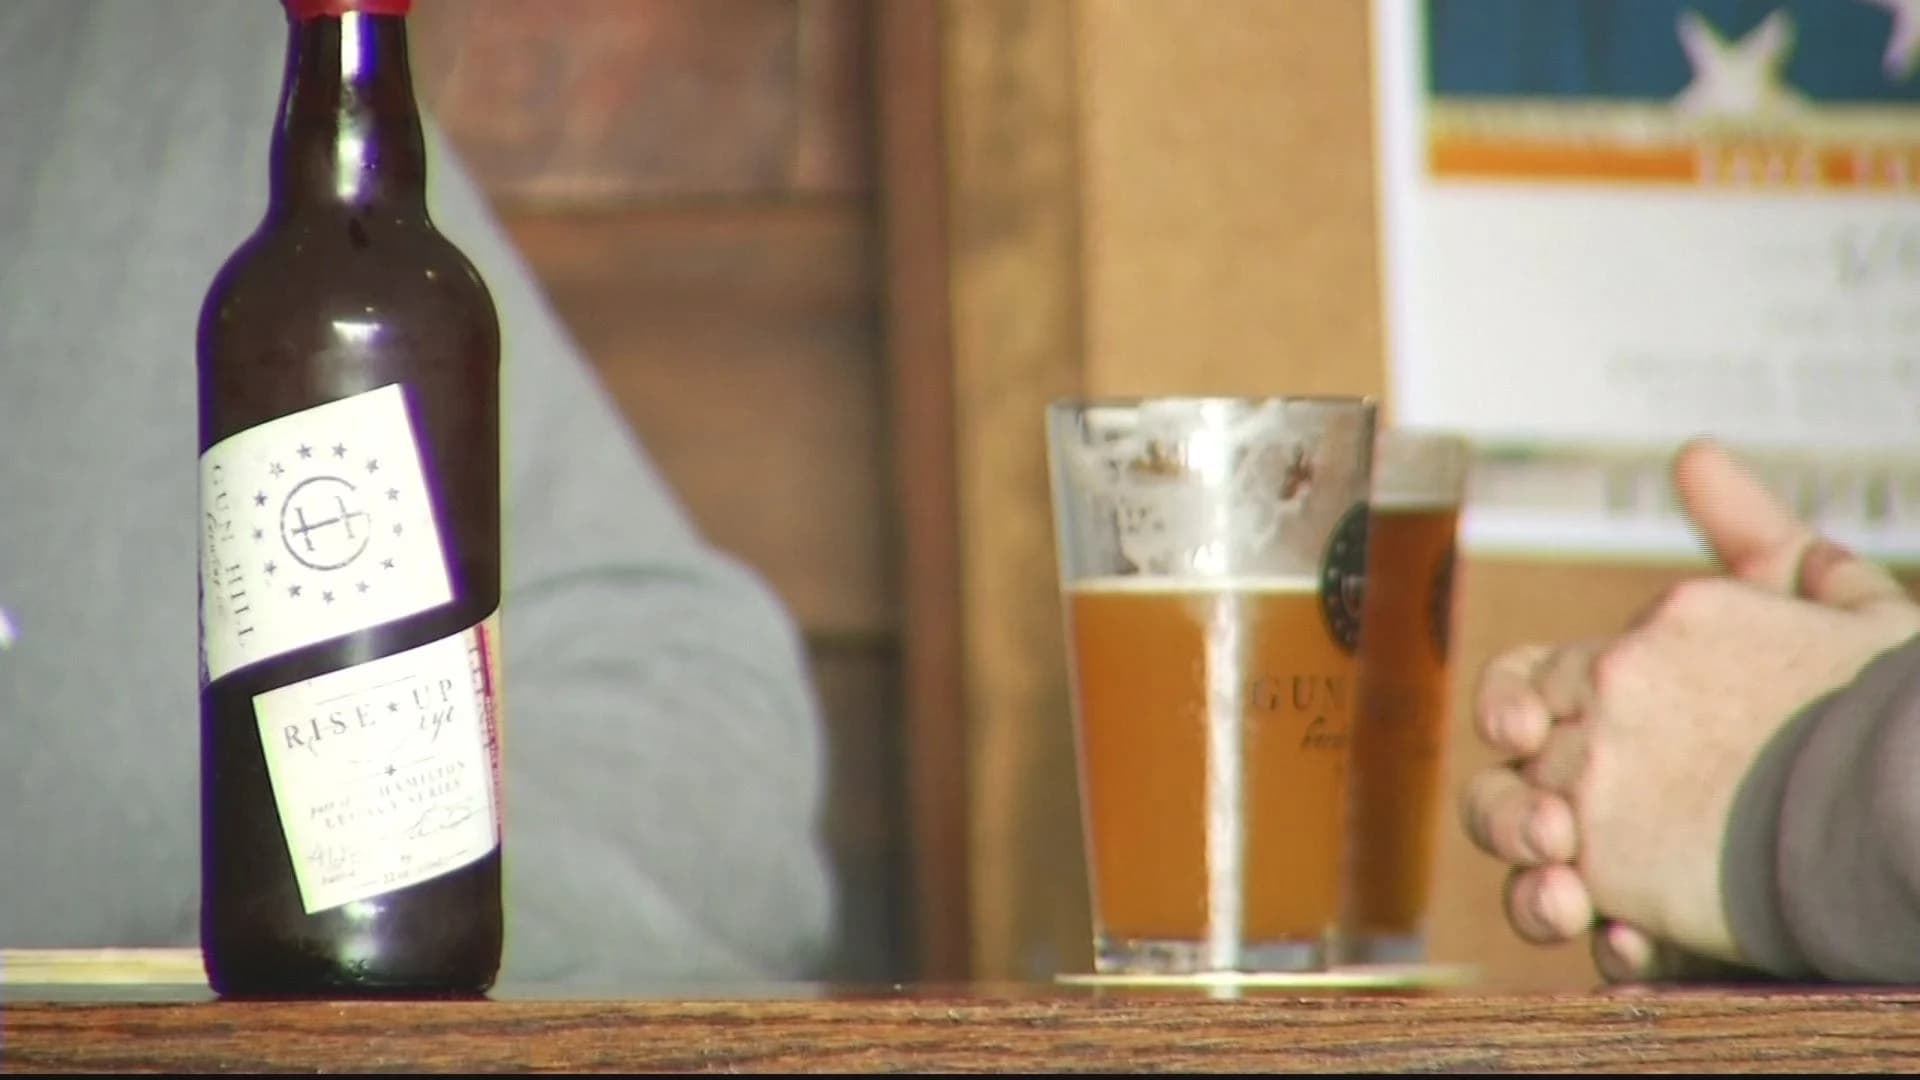 Bronx brewery's craft beer inspired by 'Hamilton'